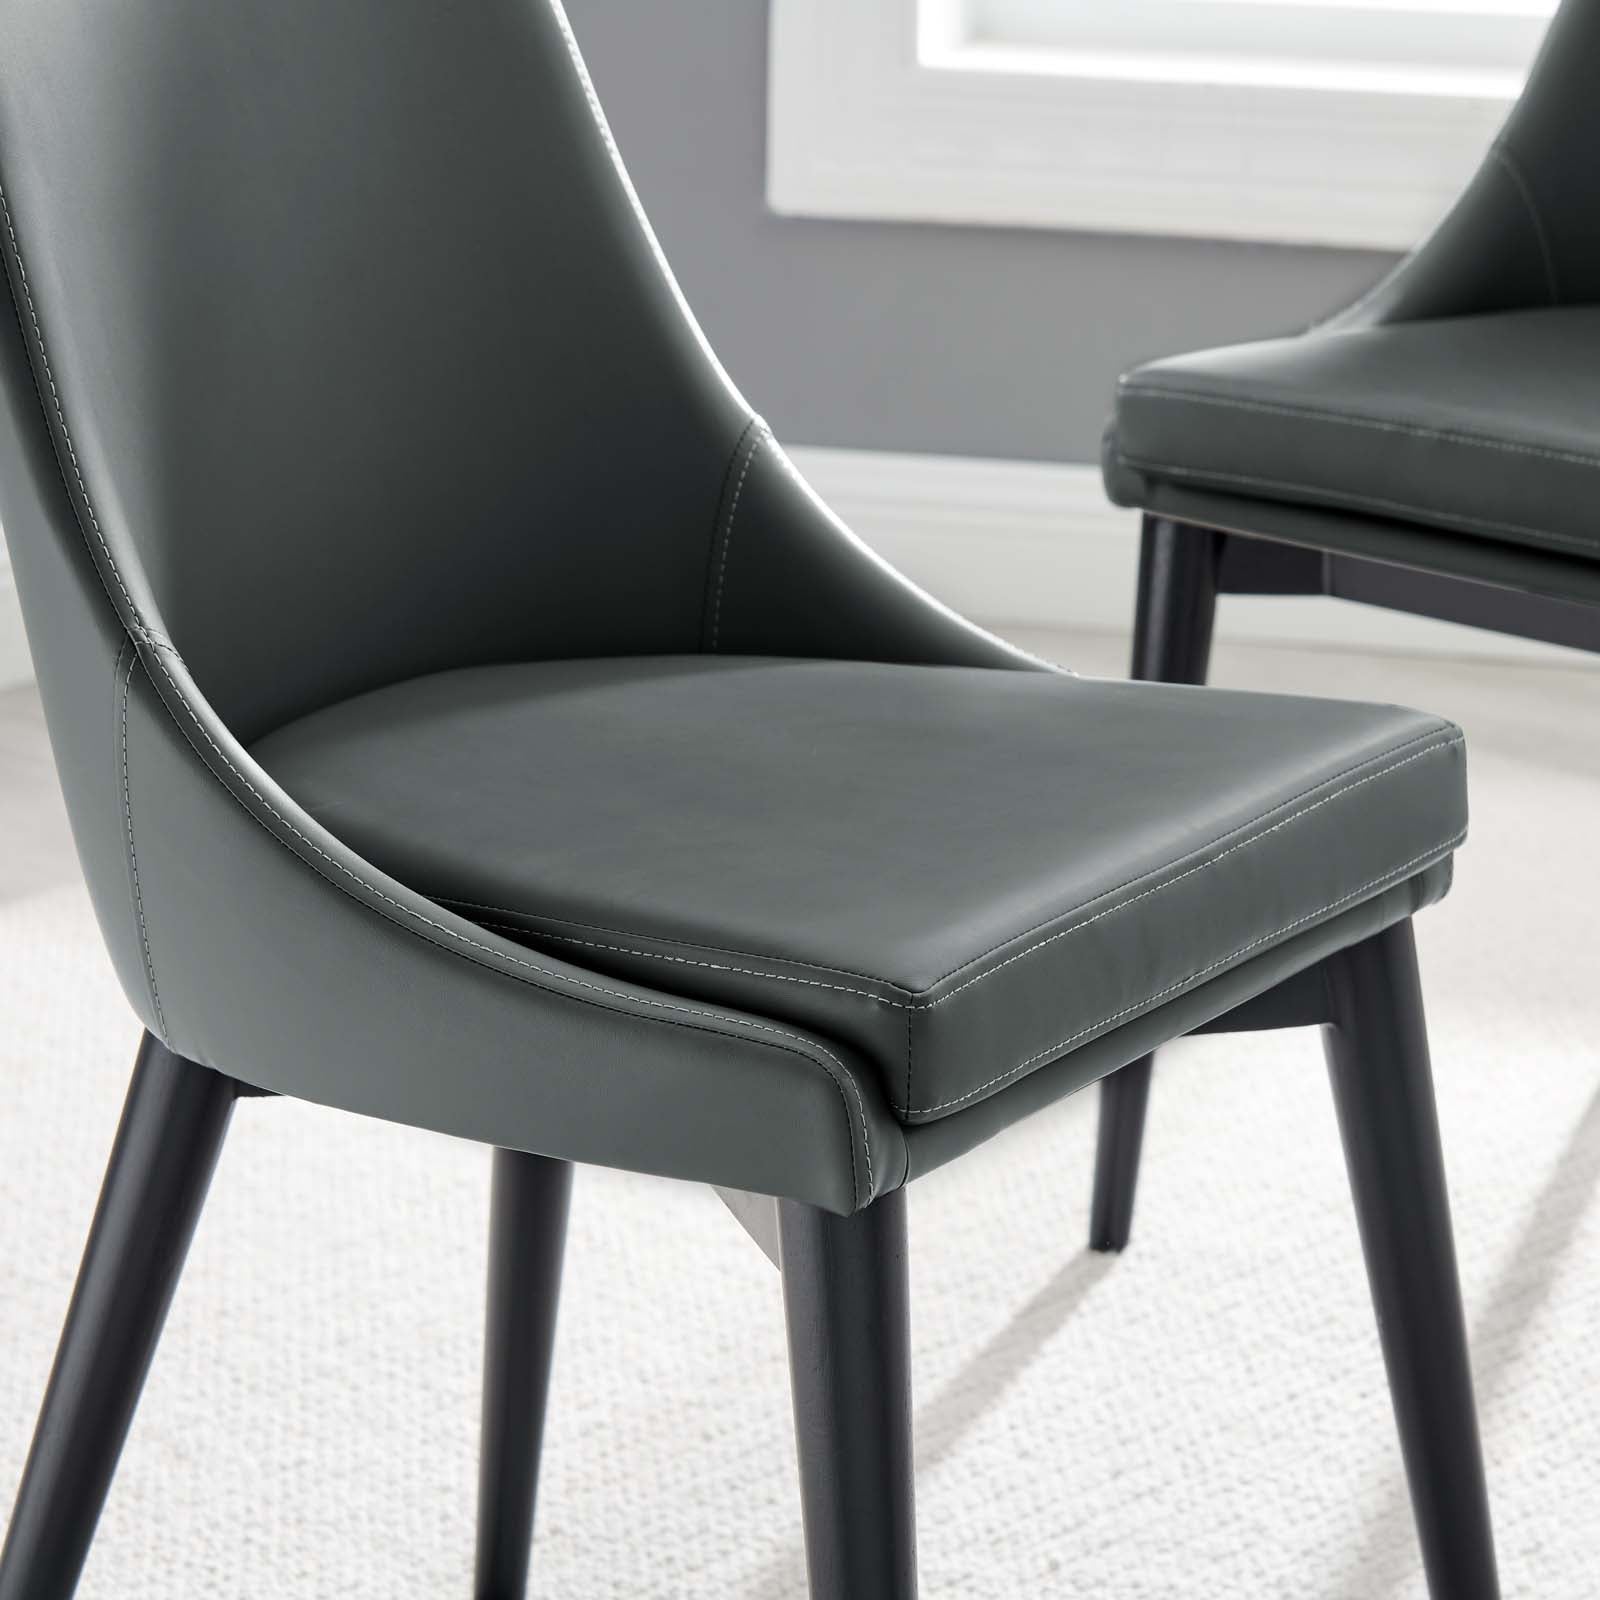 Viscount Vegan Leather Dining Chair